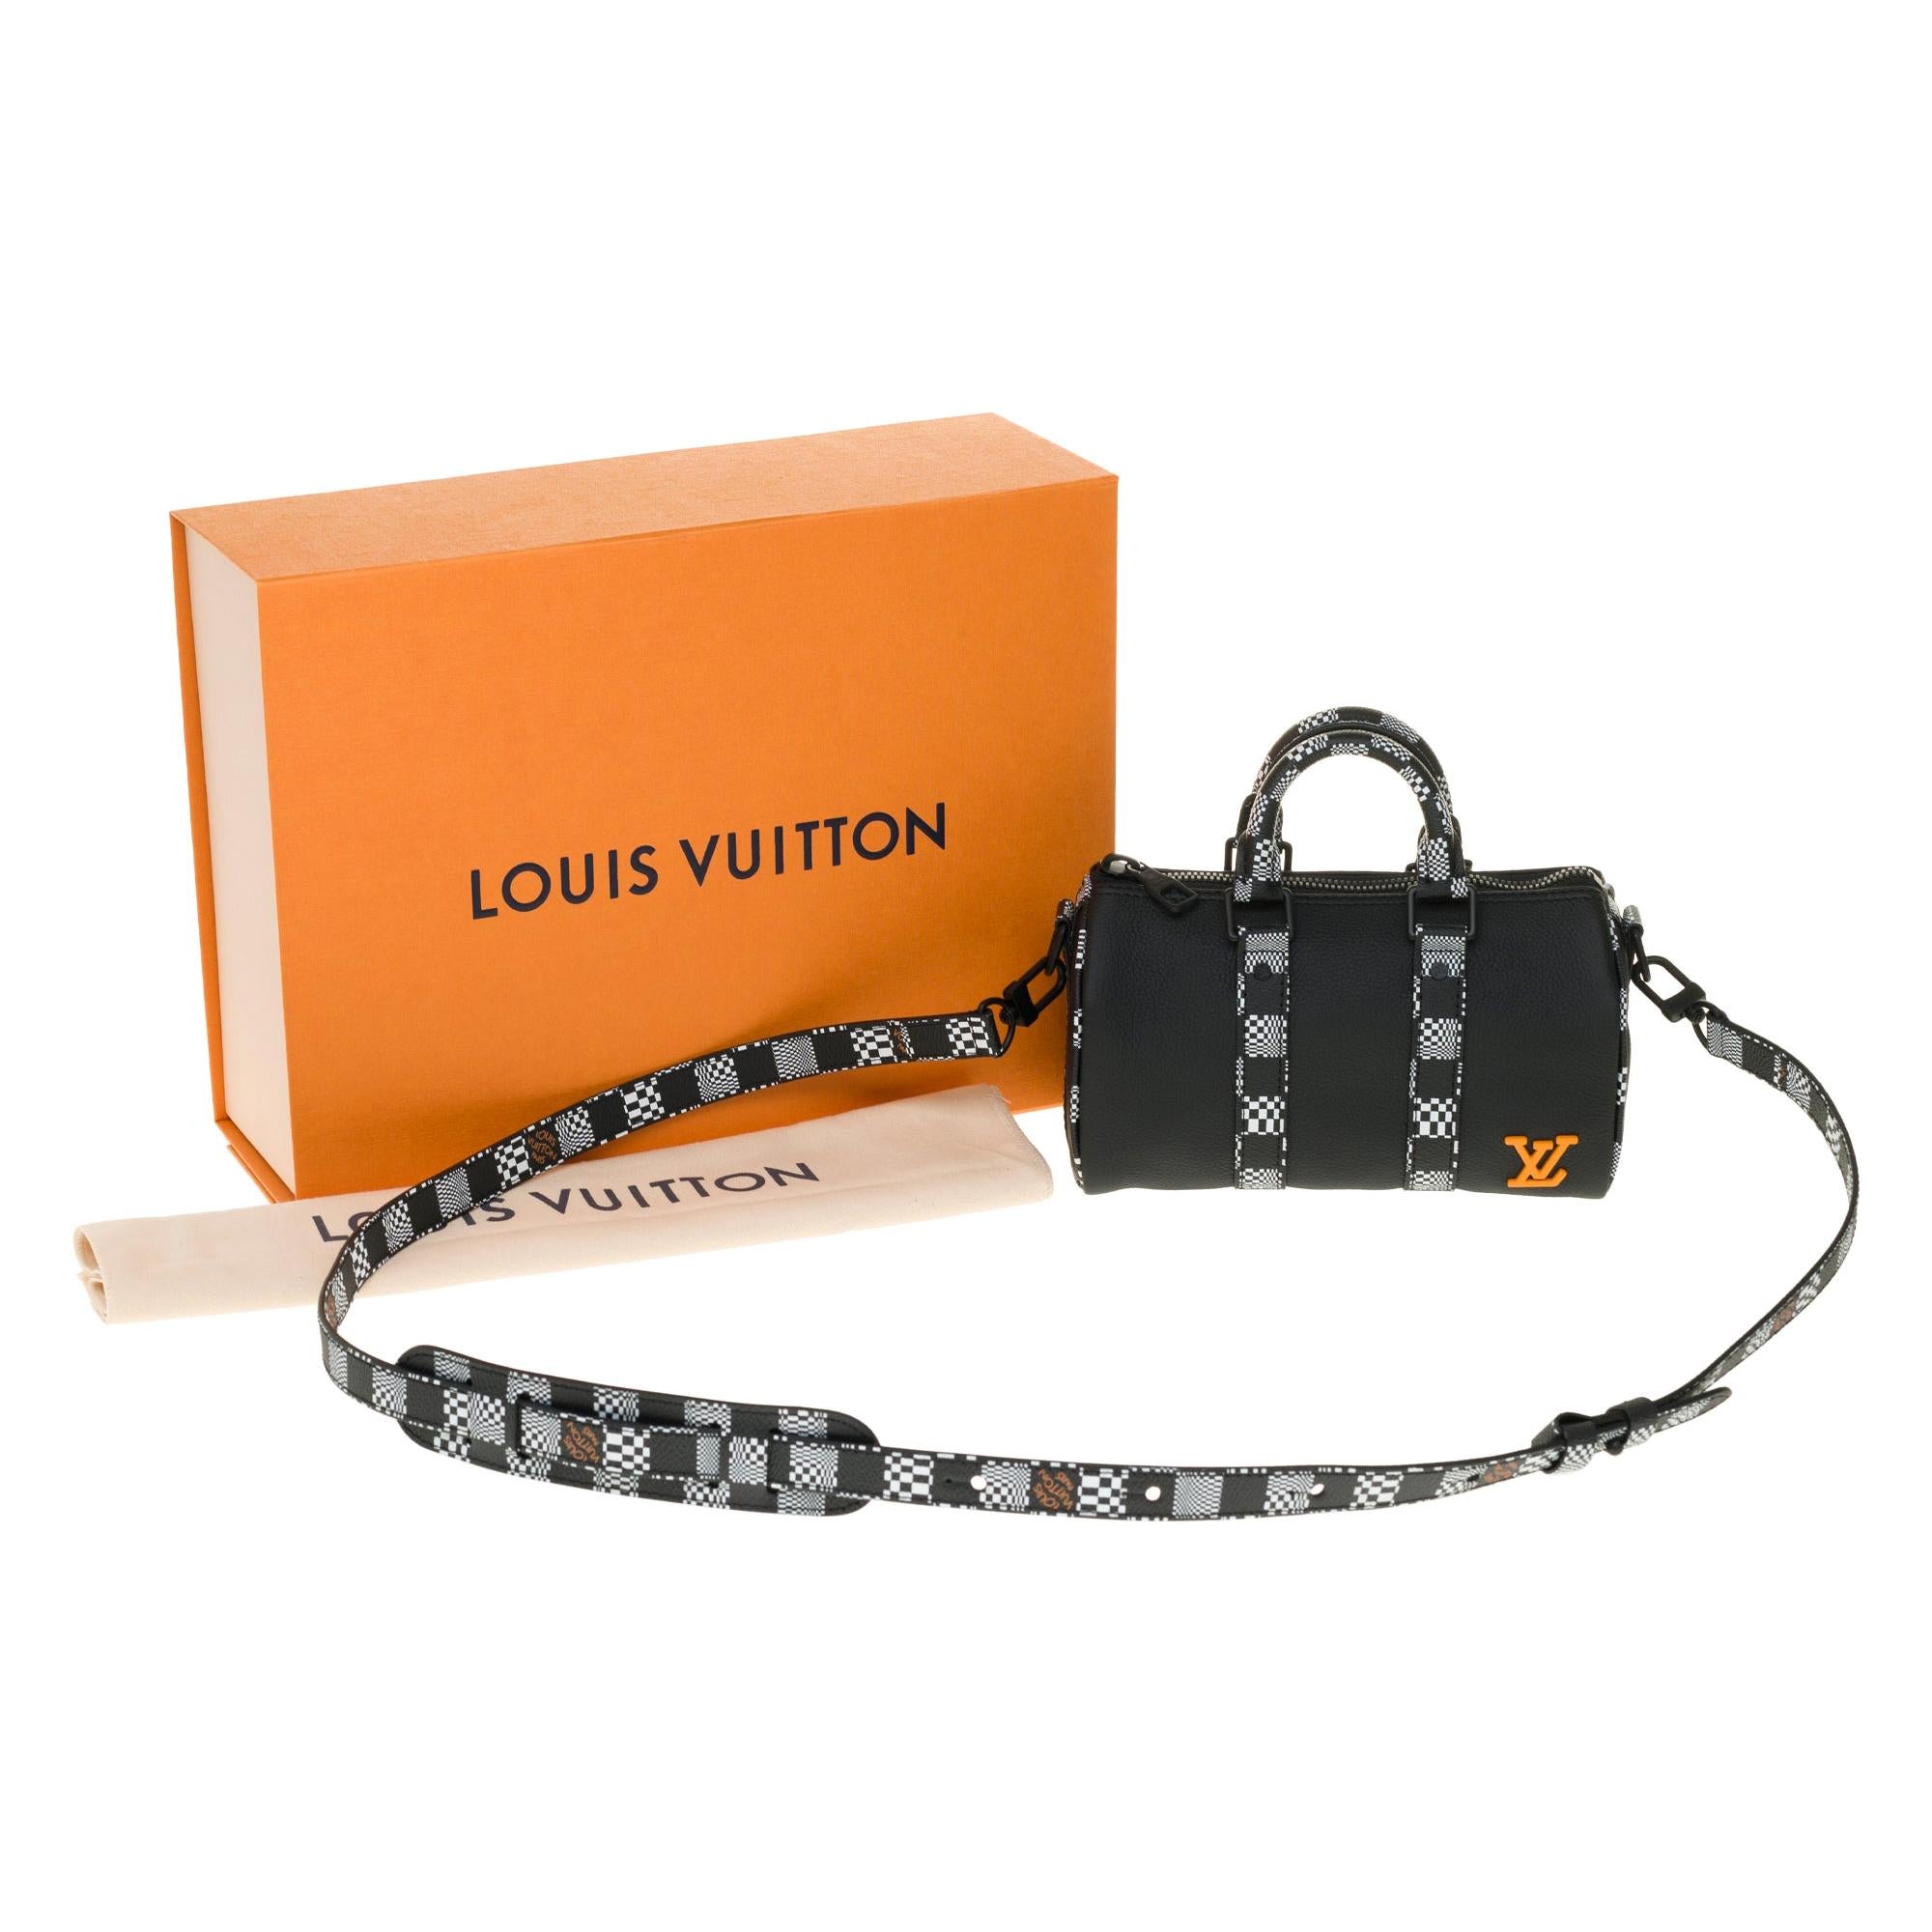 BRAND NEW-Limited edition Louis Vuitton keepall Nano by virgil abloh fw21